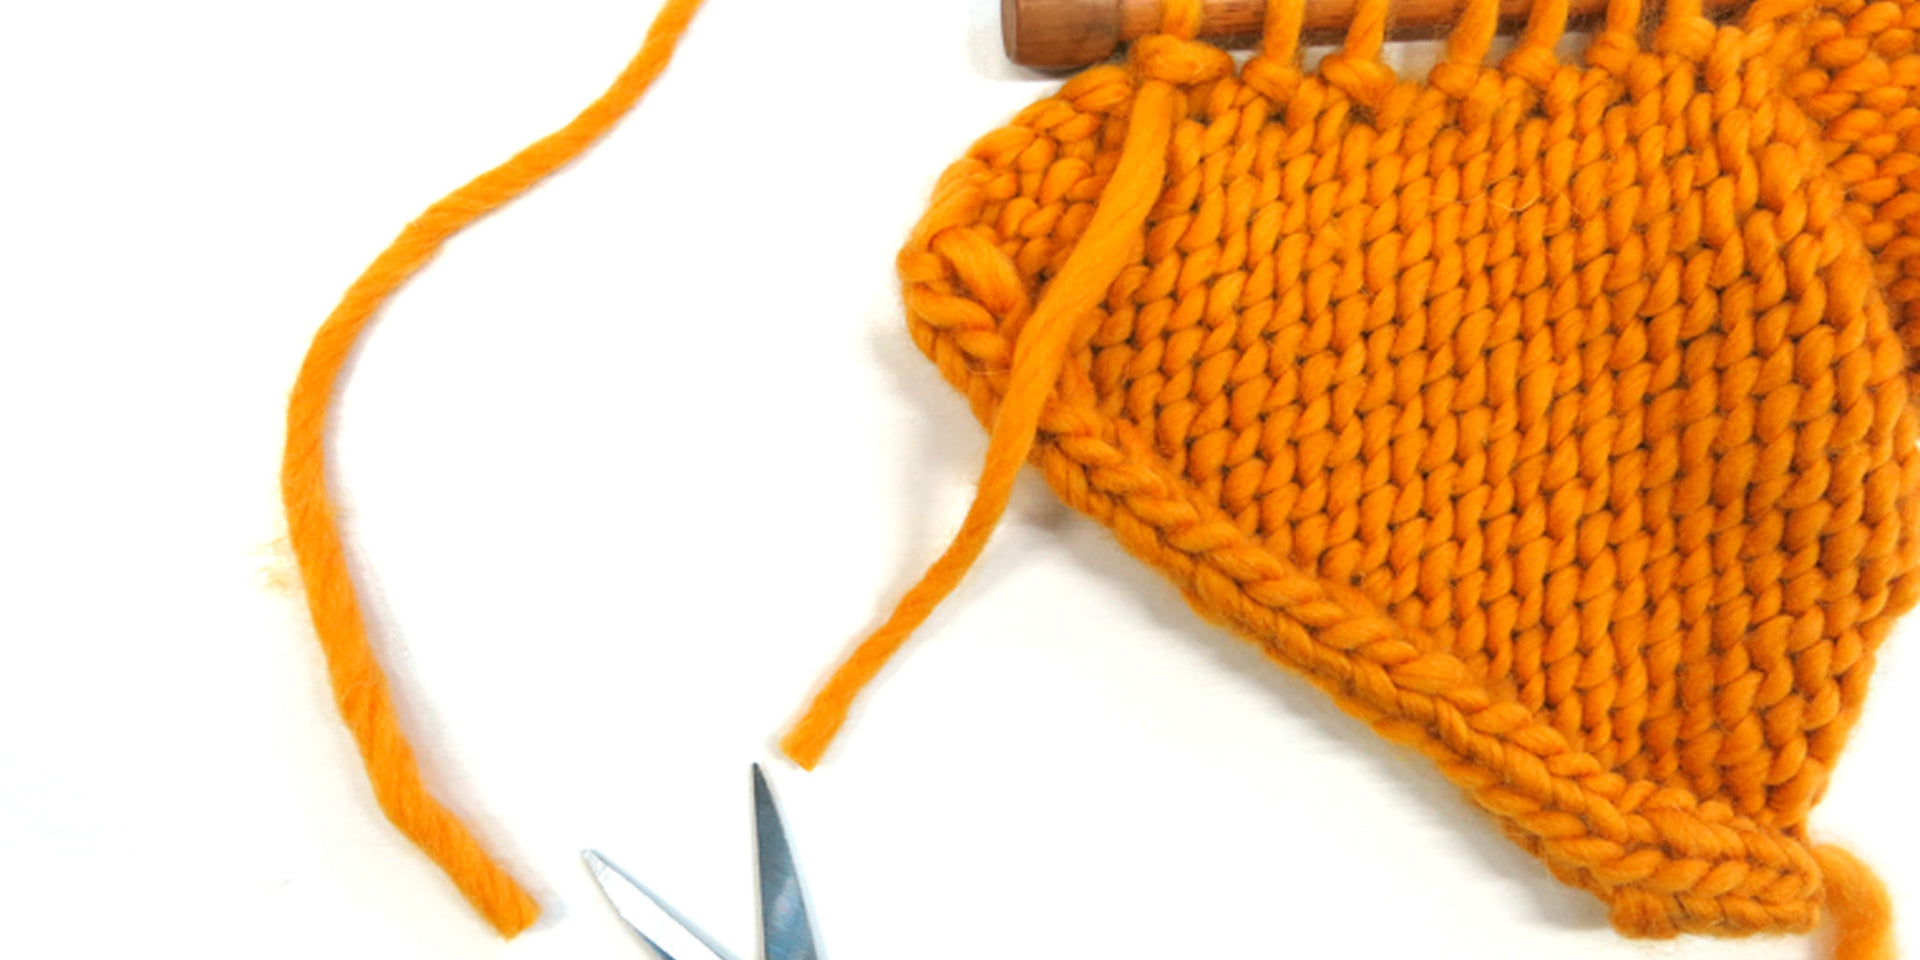 How to Swiss Darn your Knits